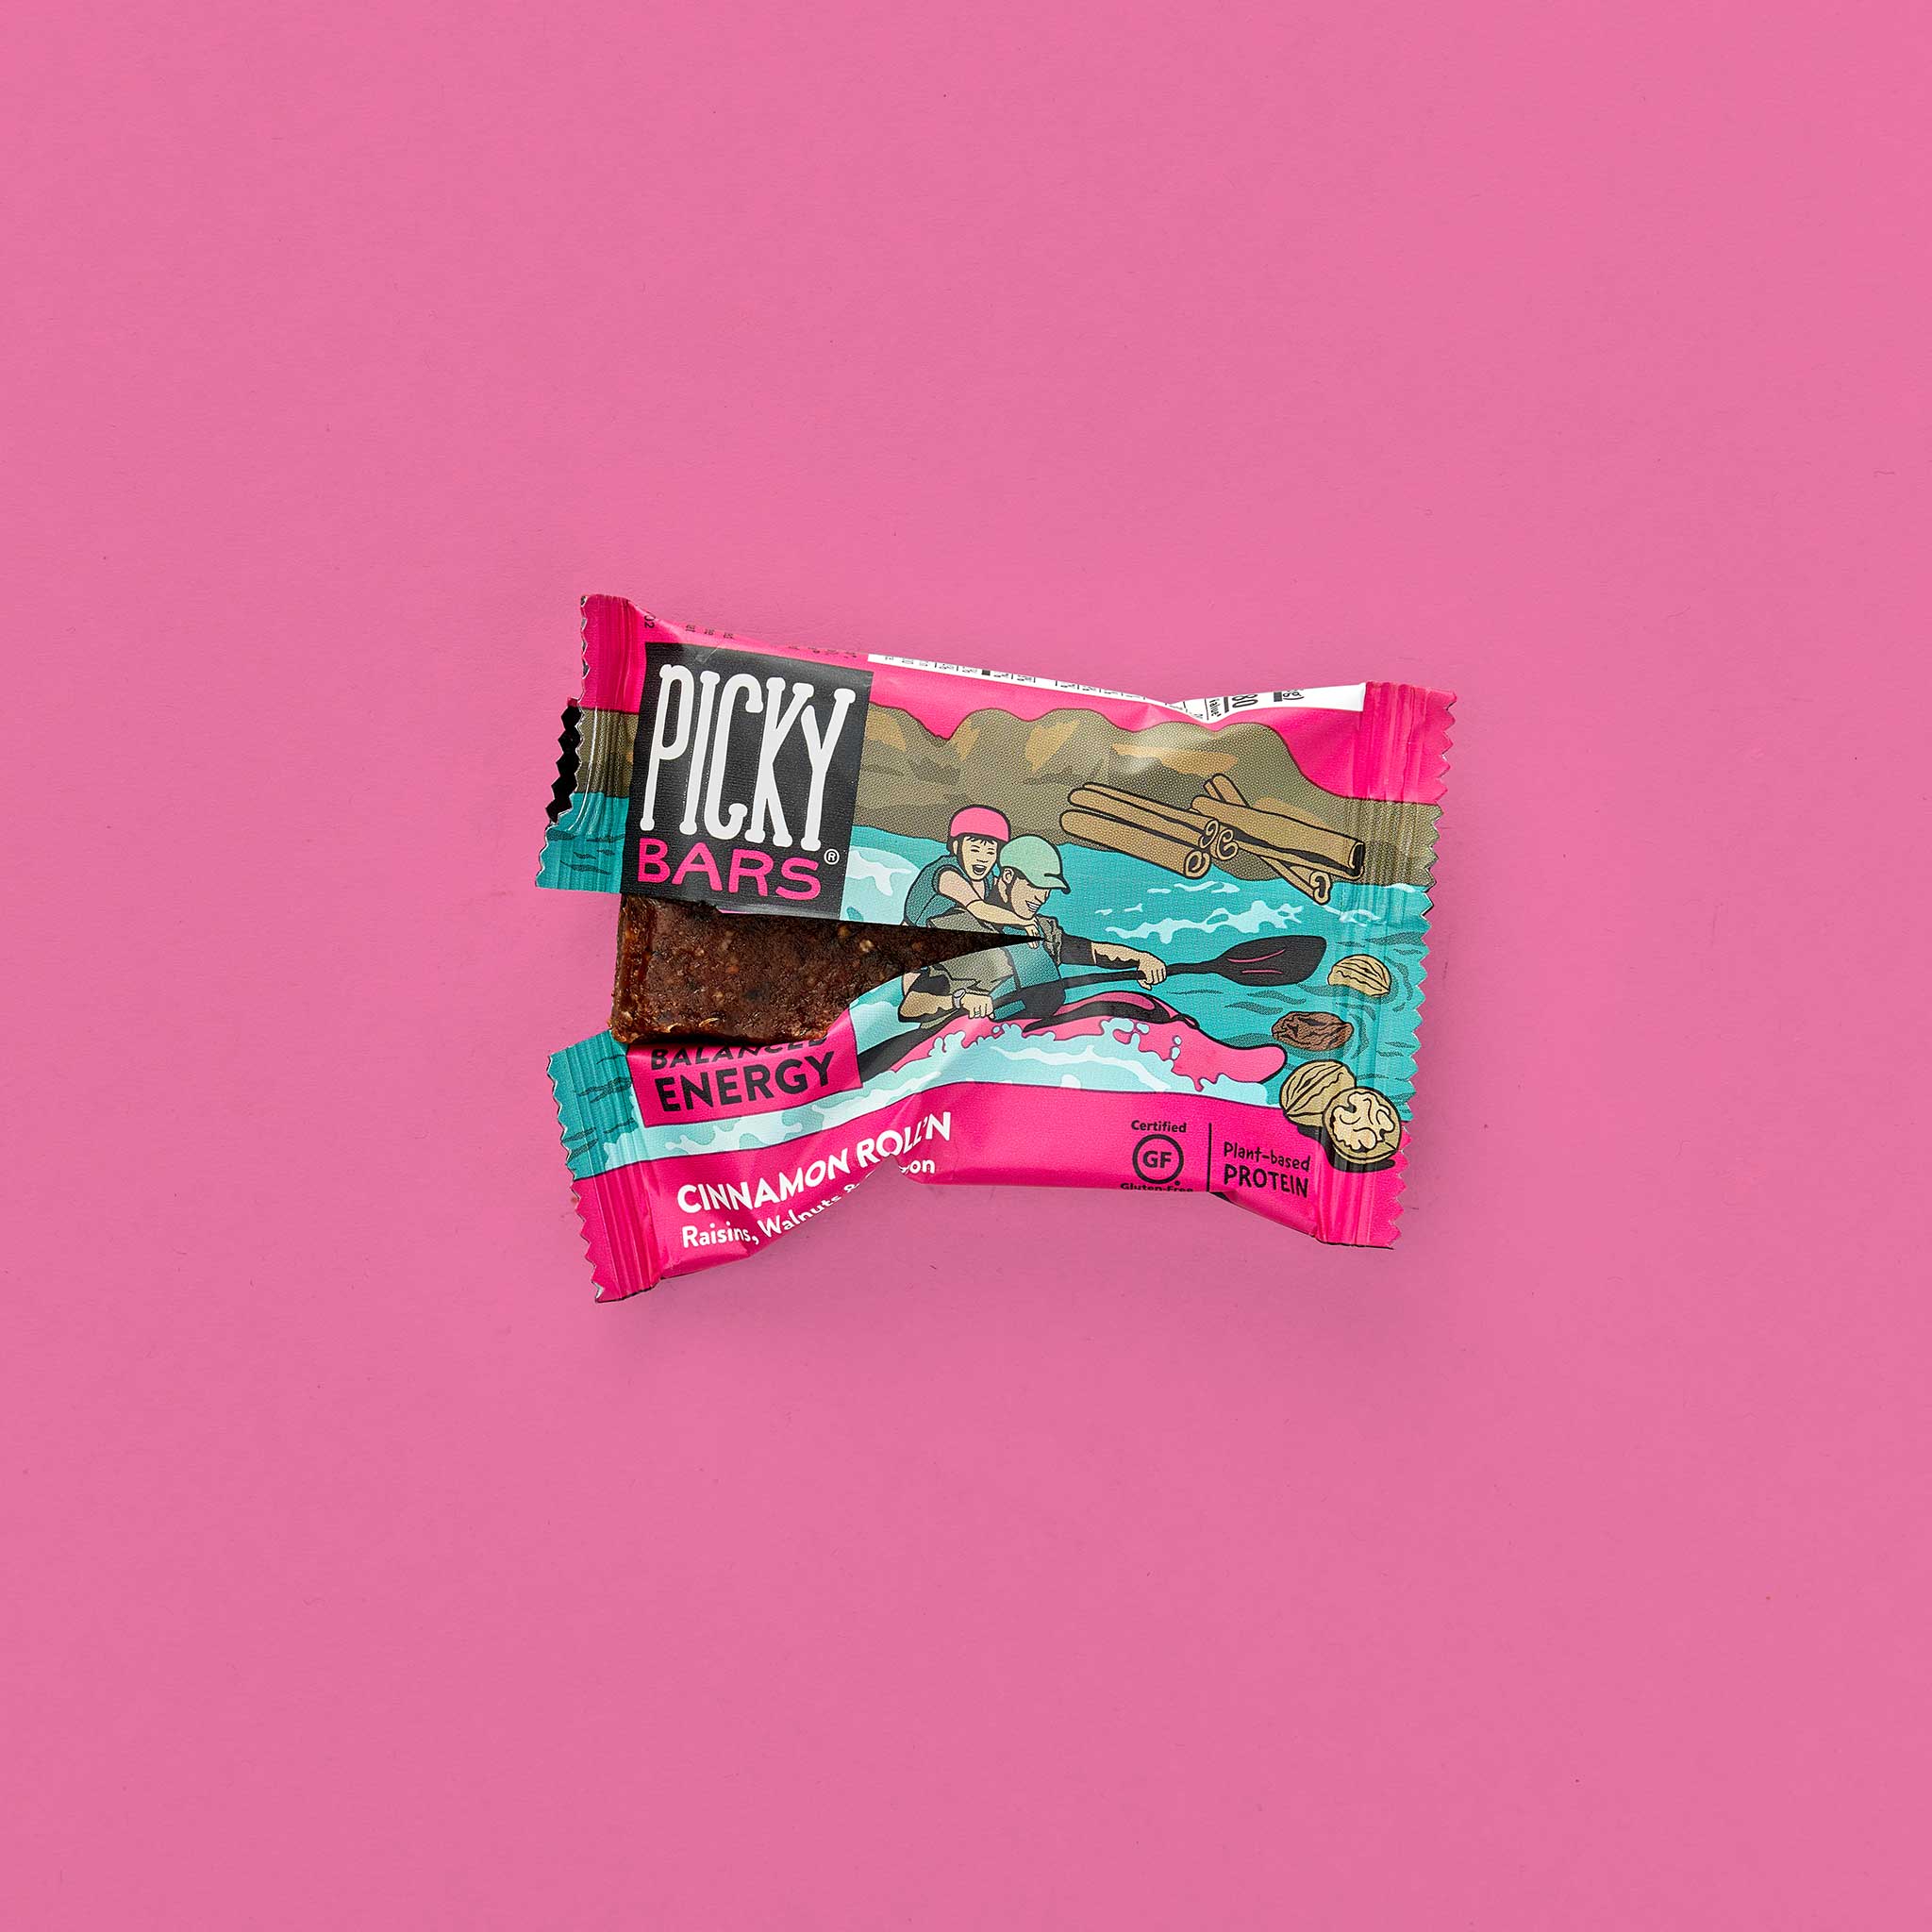 The Cinnamon Roll'n Picky Bars feature a mix of complex carbs, fats, and proteins to help power through the day by giving you an energy boost.